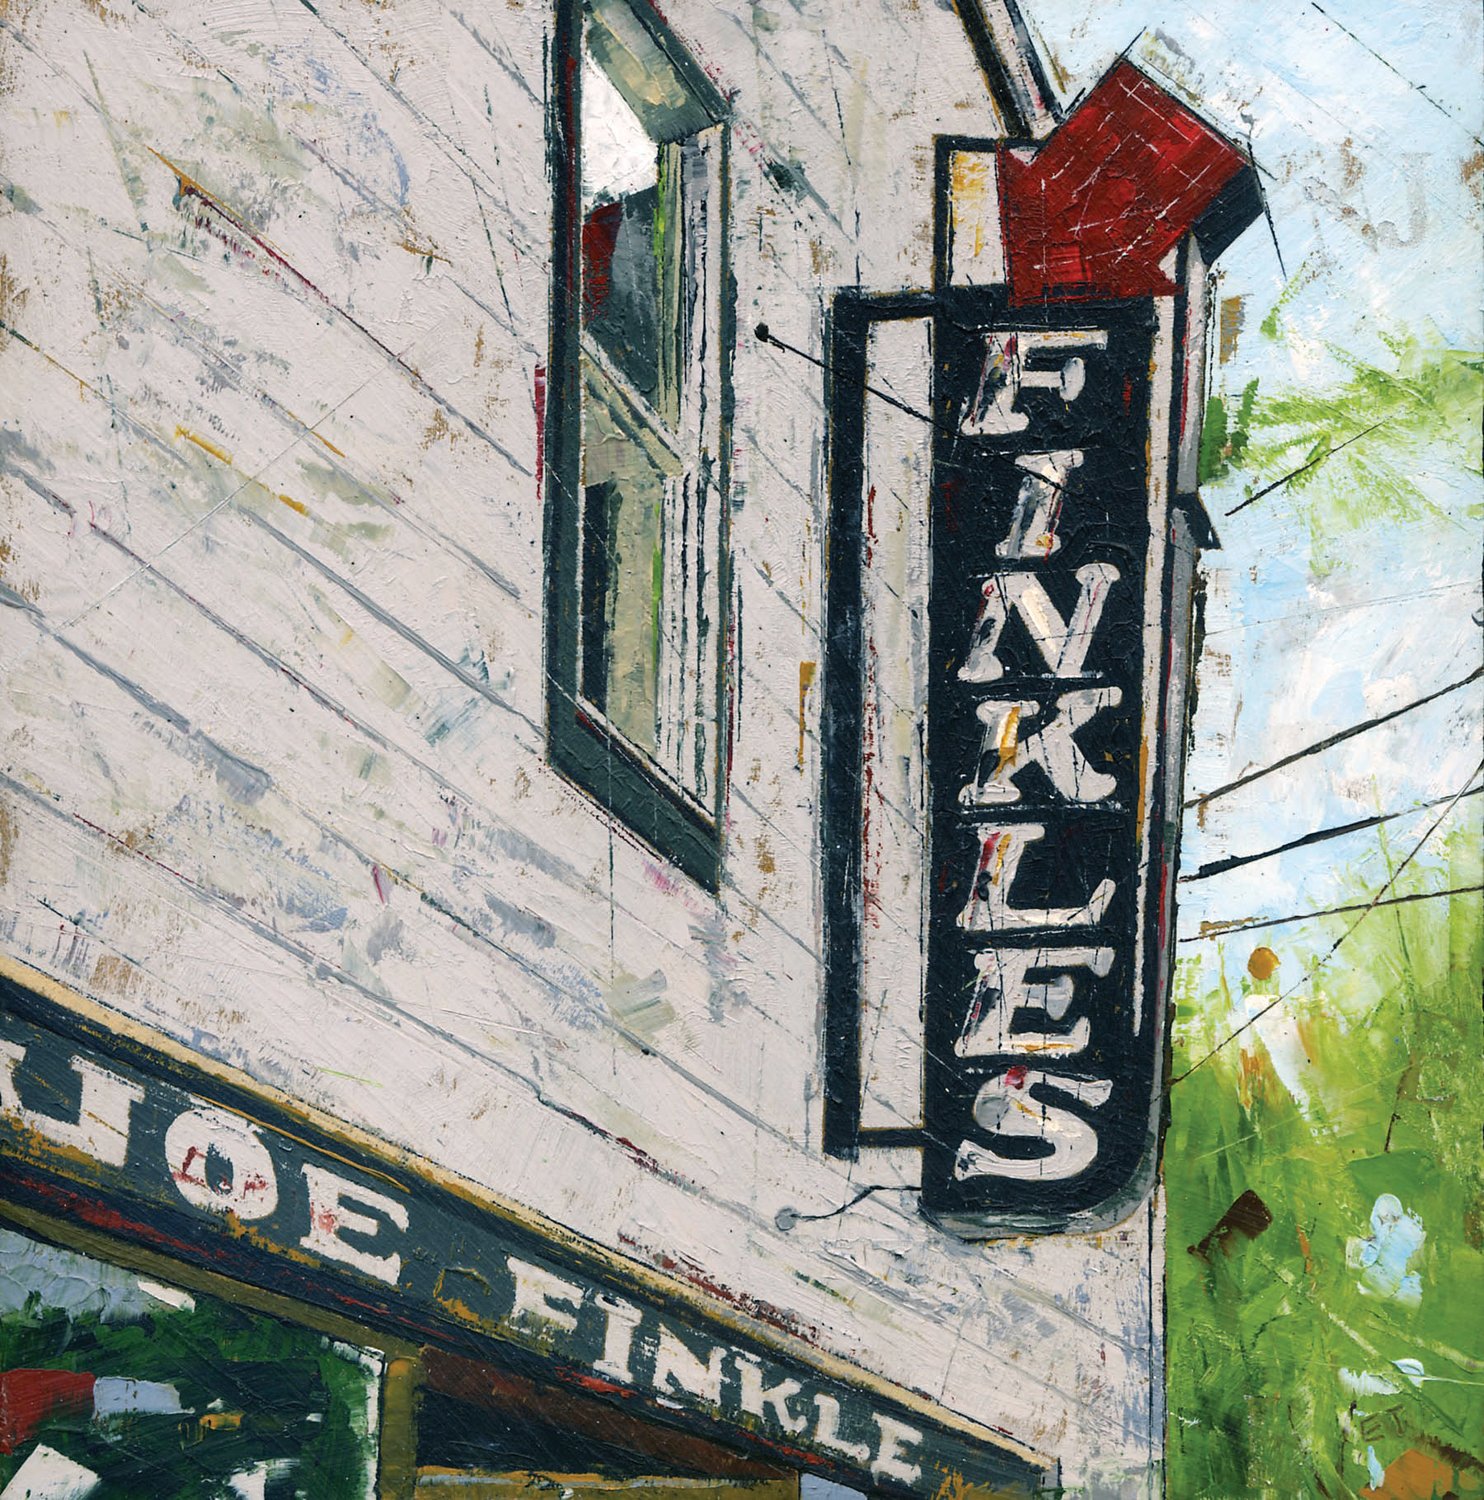 ‘Finkle’s” is by Emily Thompson.